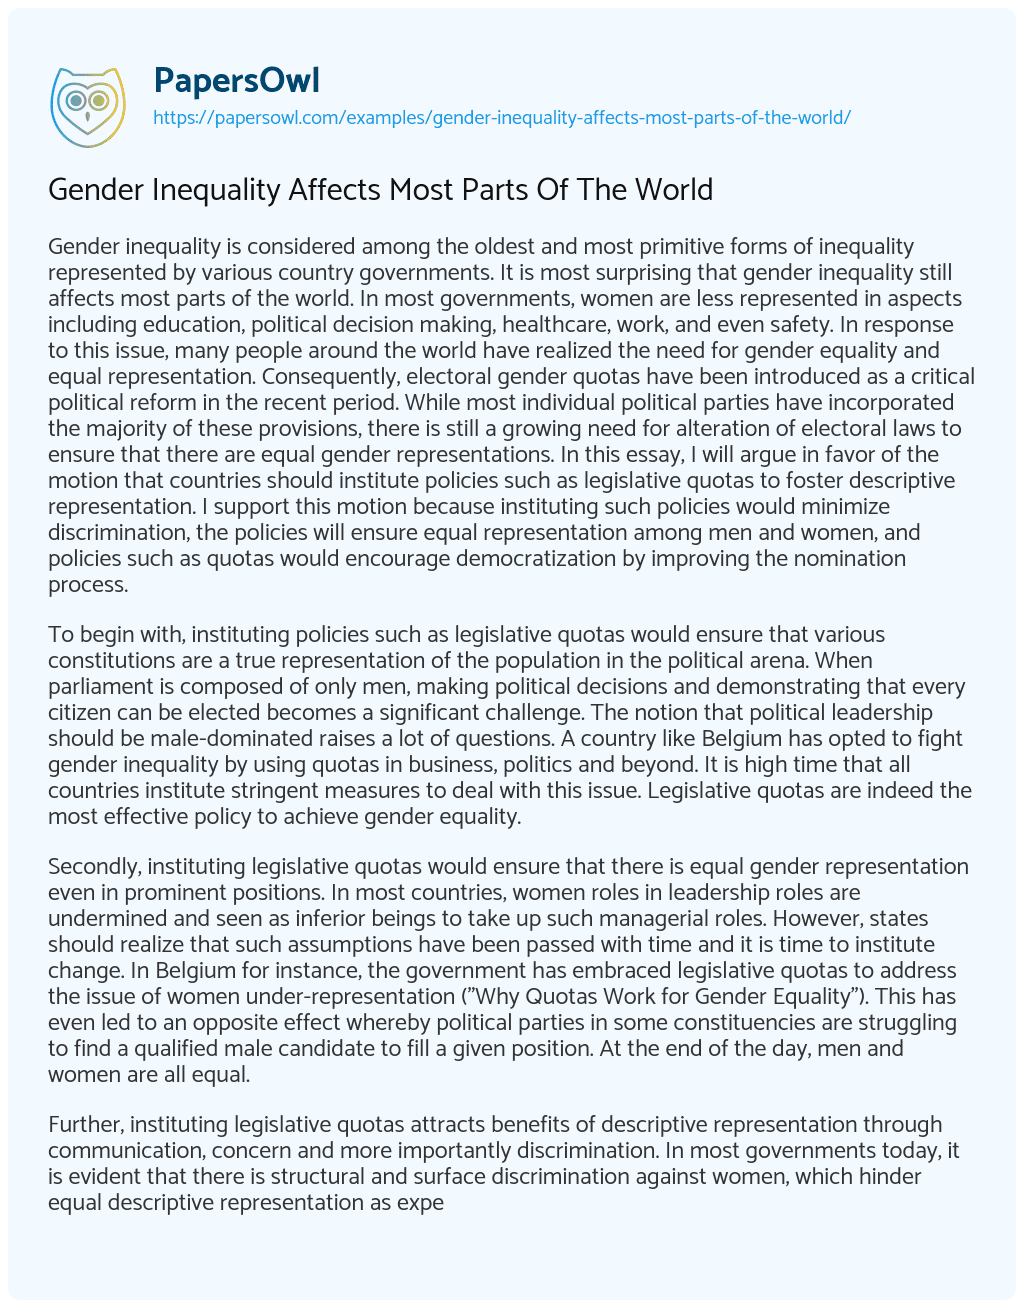 Gender Inequality Affects most Parts of the World essay